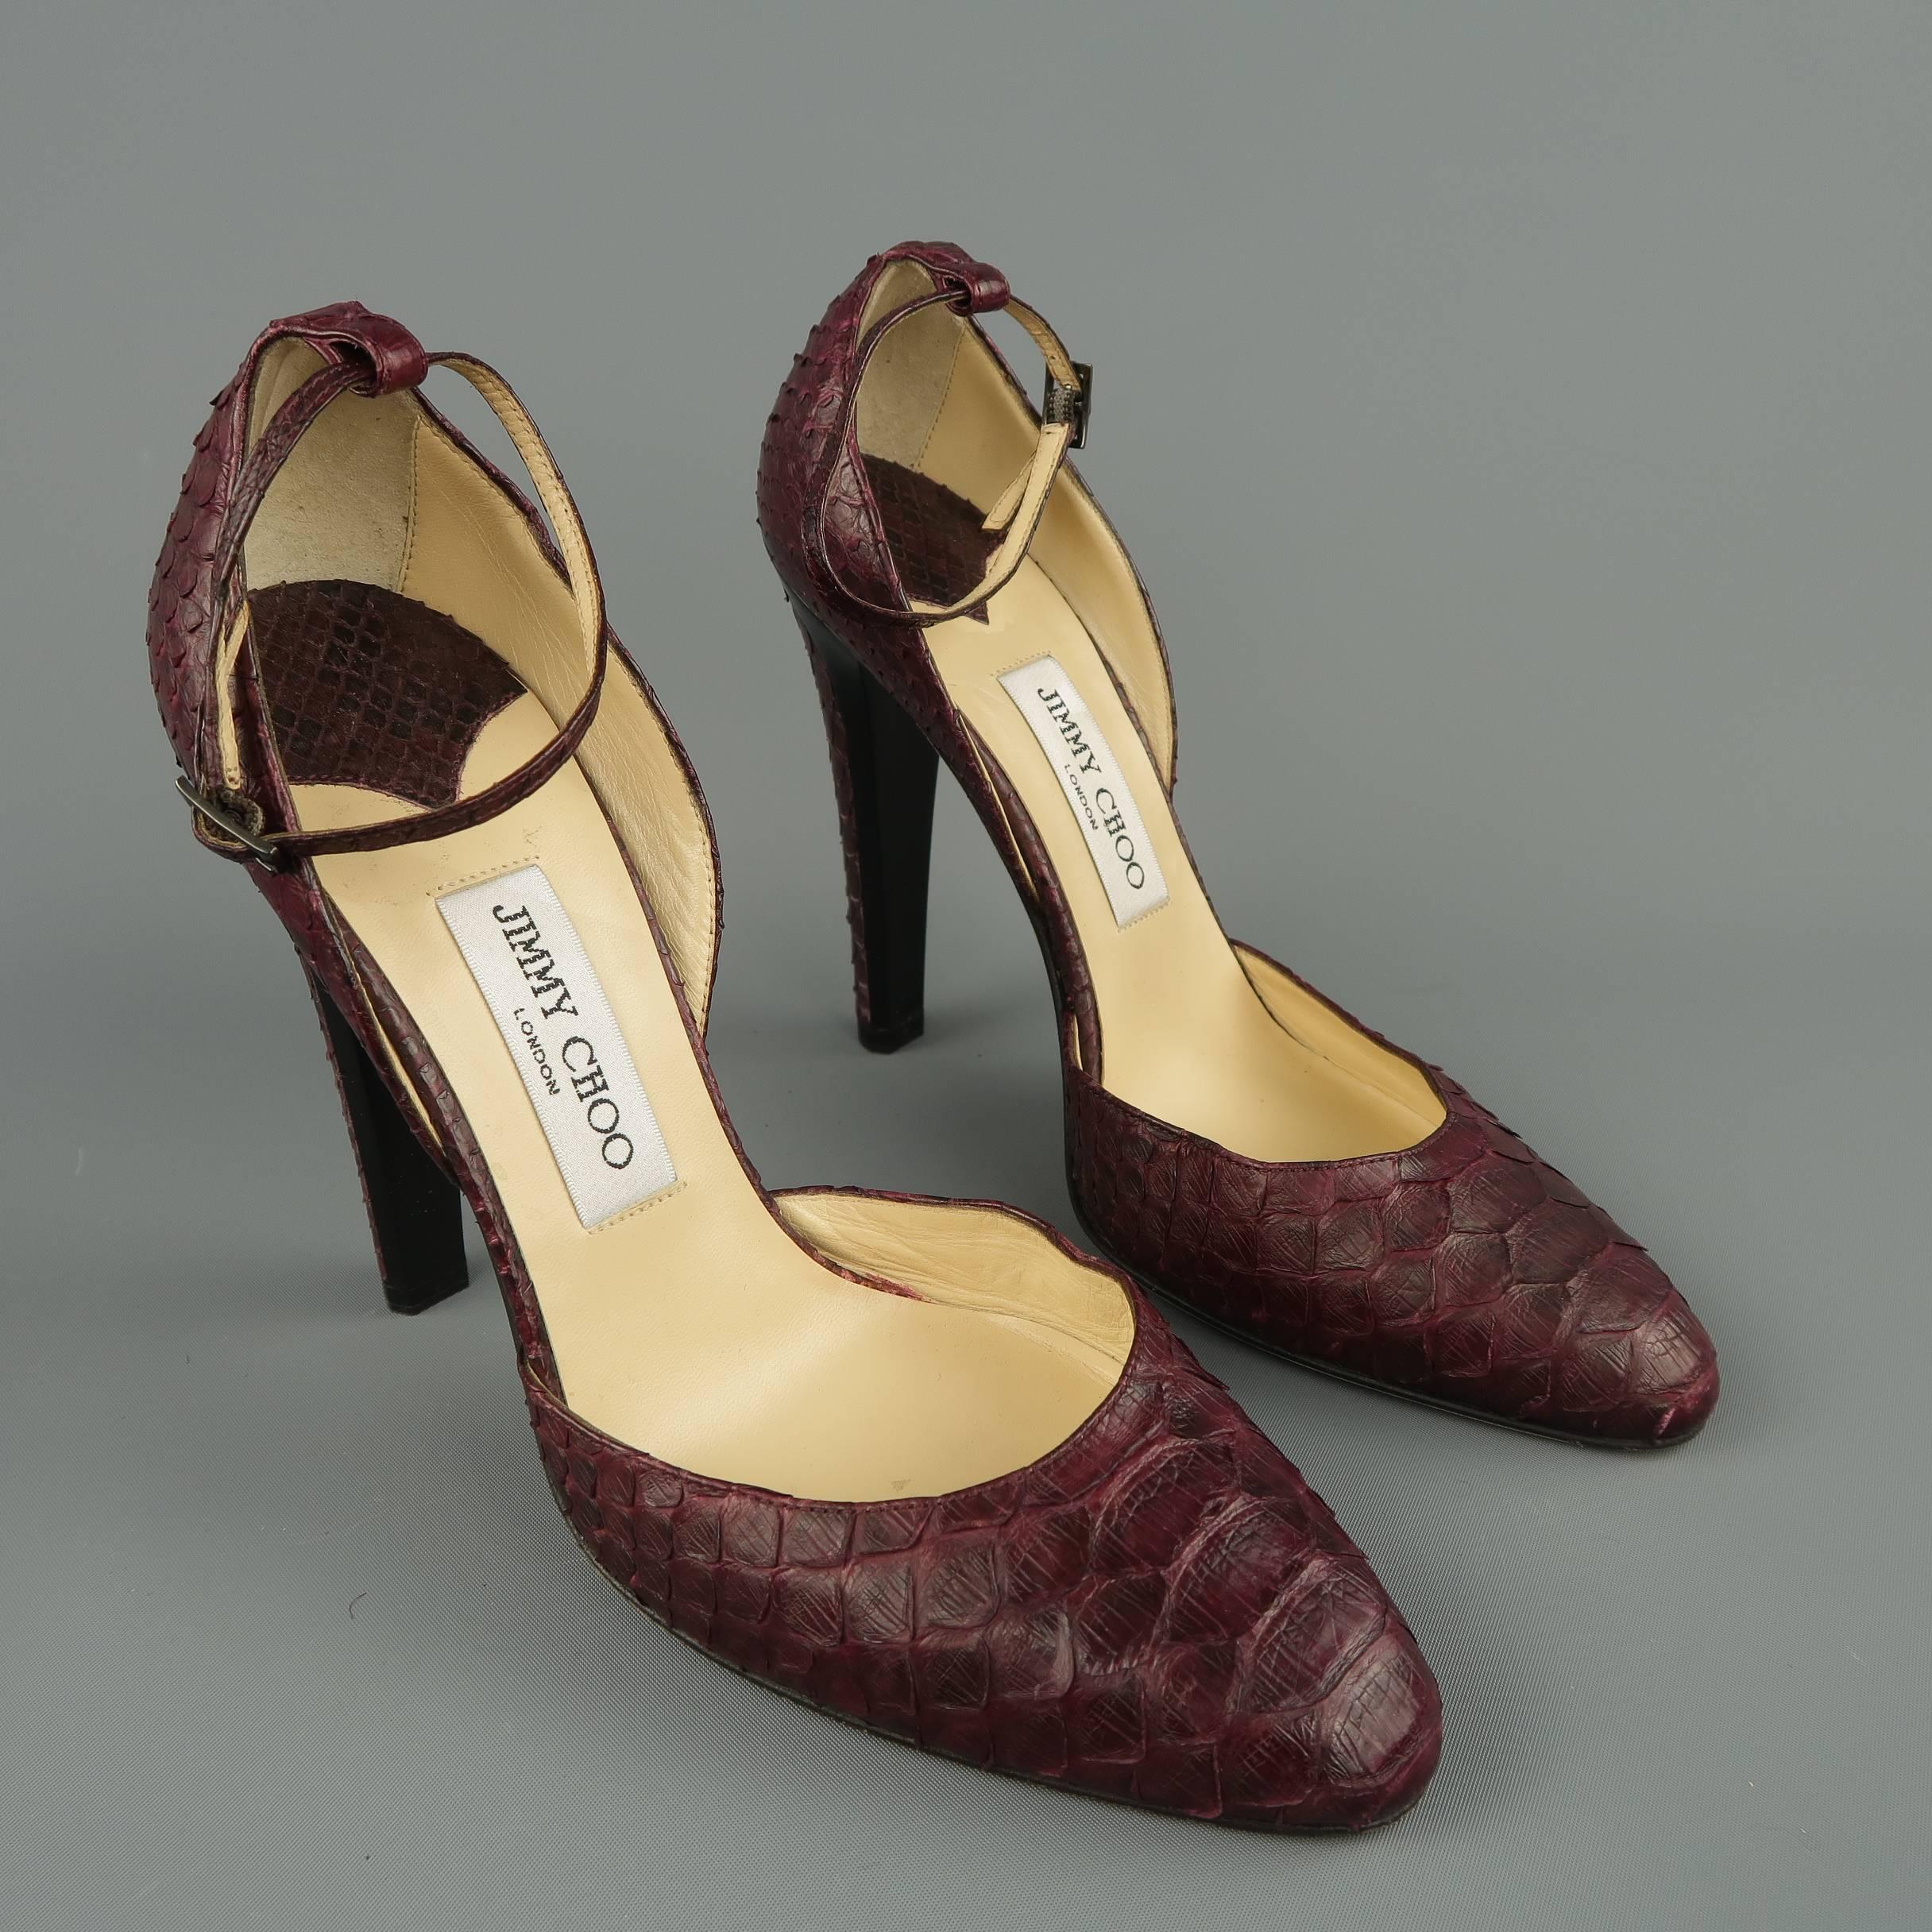 JIMMY CHOO d'orsay pumps come in plum purple python leather with a pointed toe, ankle strap, and thick black lacquered heel with leather panel. Made in Italy.
 
Excellent Pre-Owned Condition.
Marked: IT 40
 
Measurements:
 
Heel: 4.5 in.
